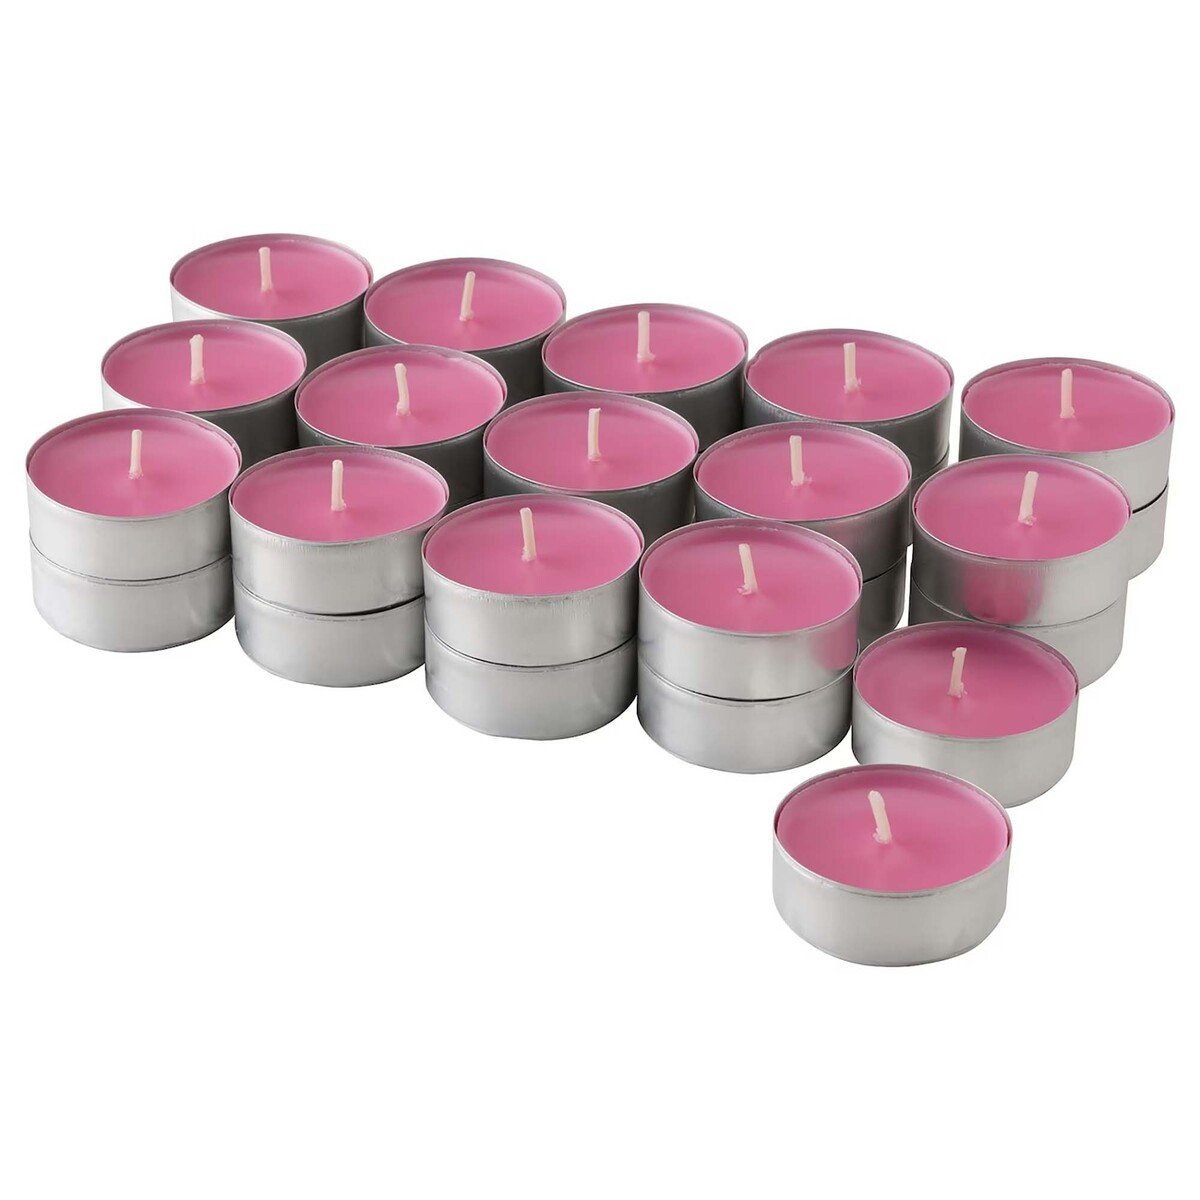 Maple Leaf Scented Tealight Candle Set 50pcs Pink